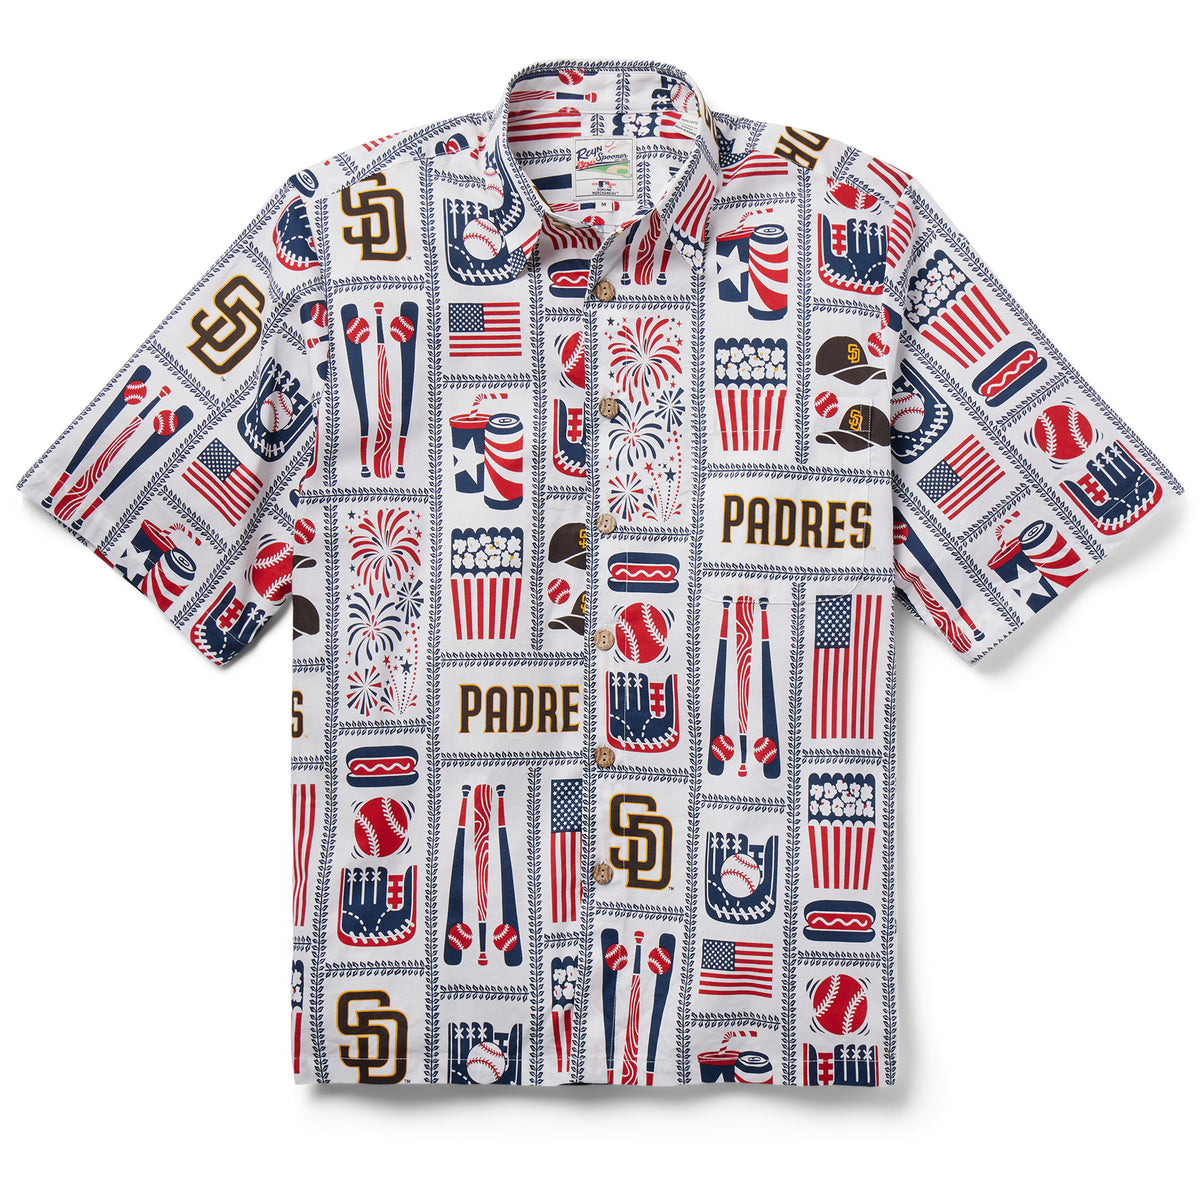 padres button up jersey